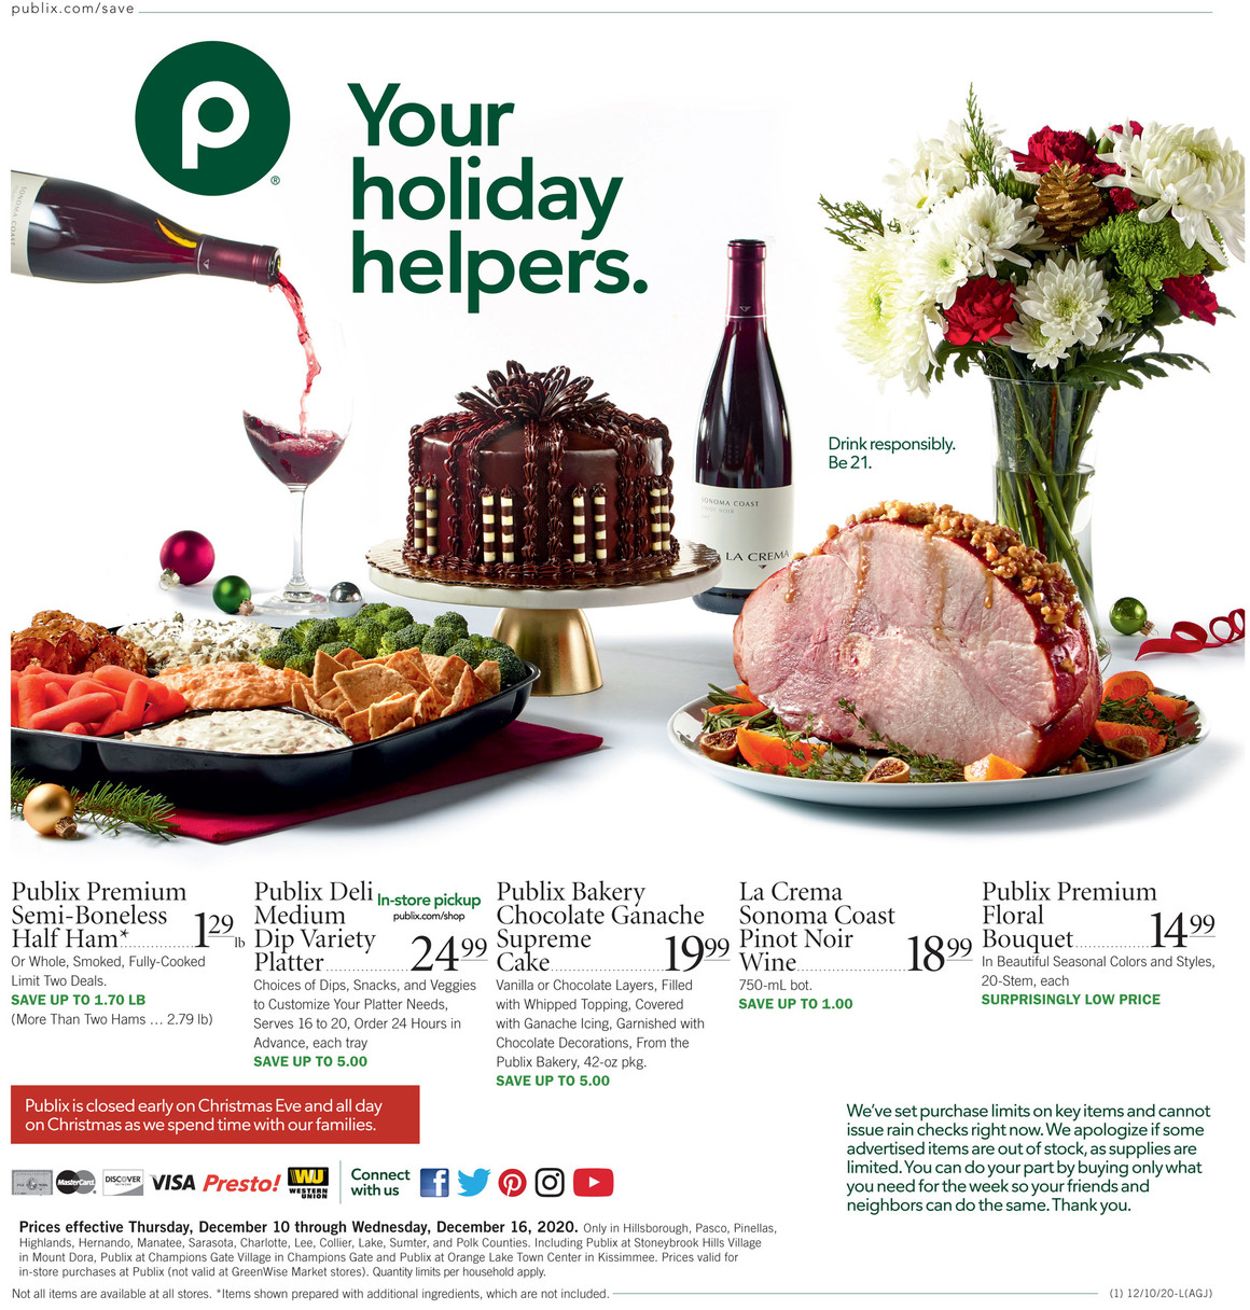 Publix Christmas Dinner / Order A Complete Easter Meal To Go Options